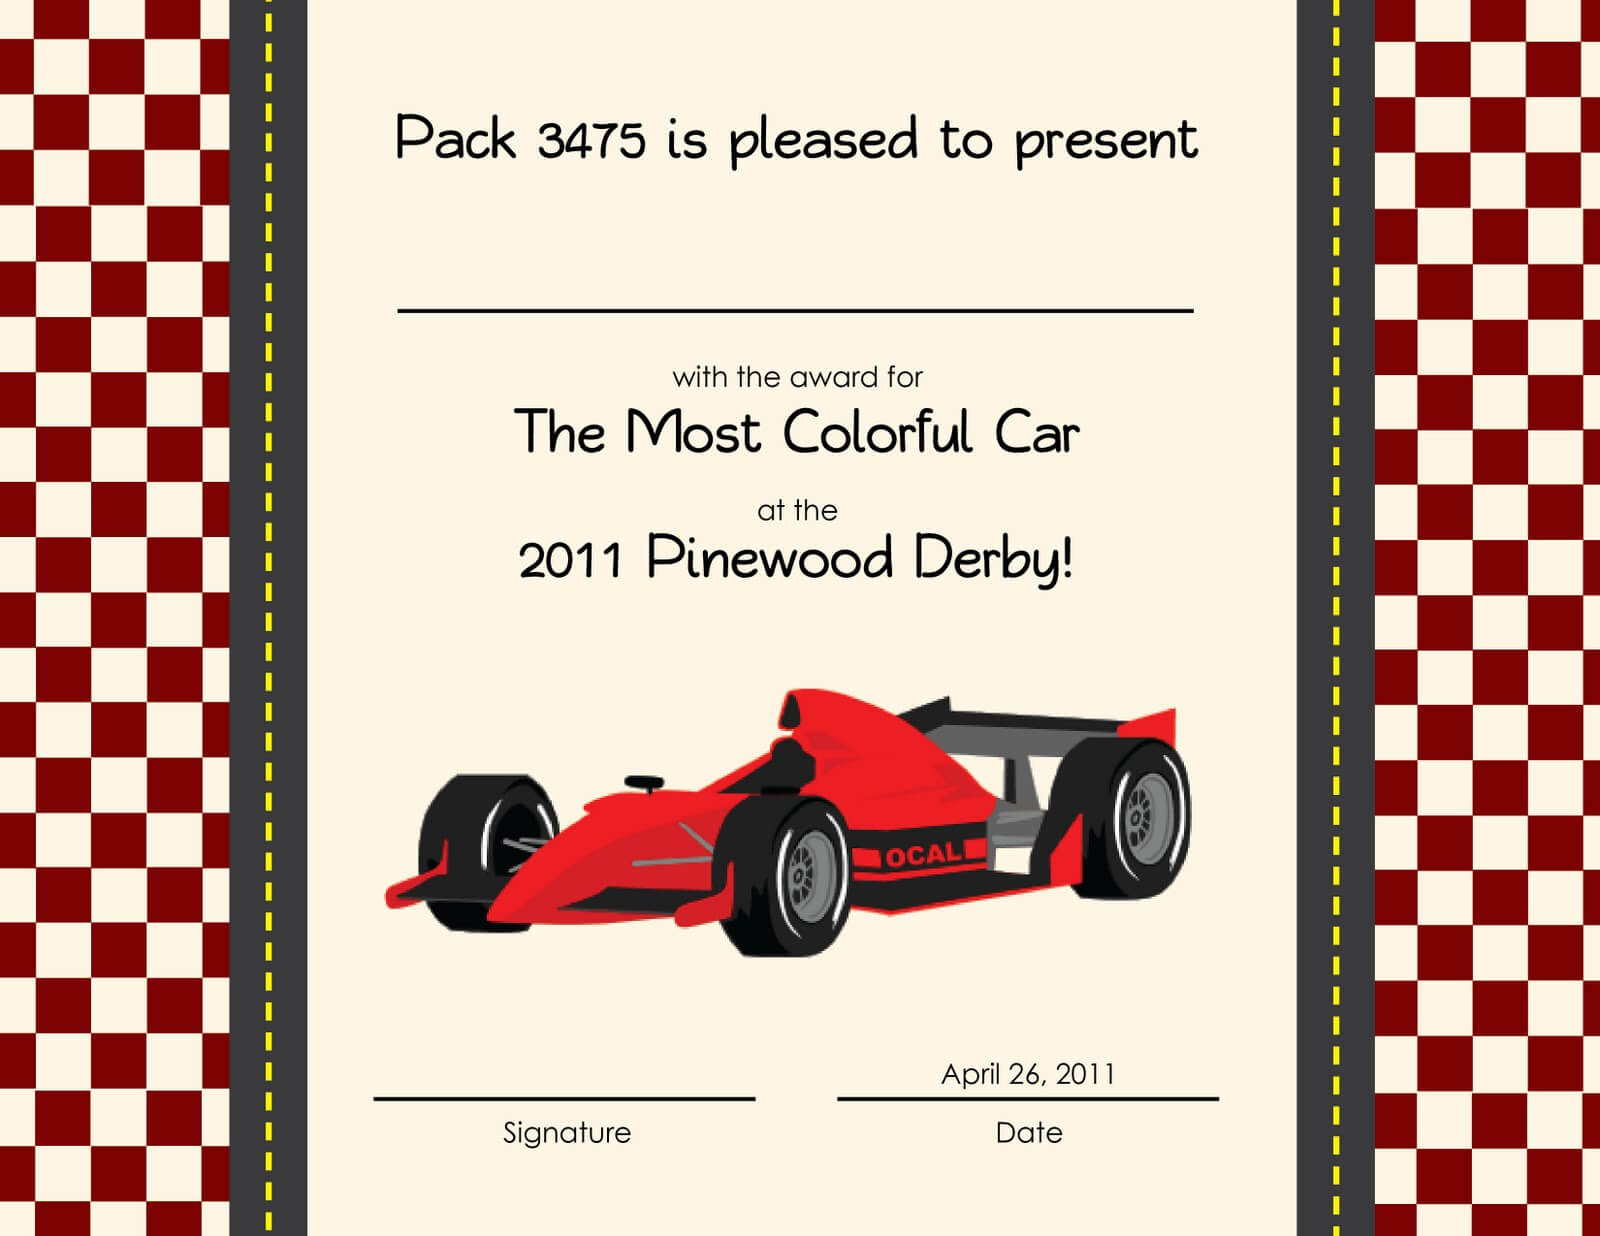 Pinewood Derby Certificate Templates ] – Pinewood Derby Throughout Pinewood Derby Certificate Template